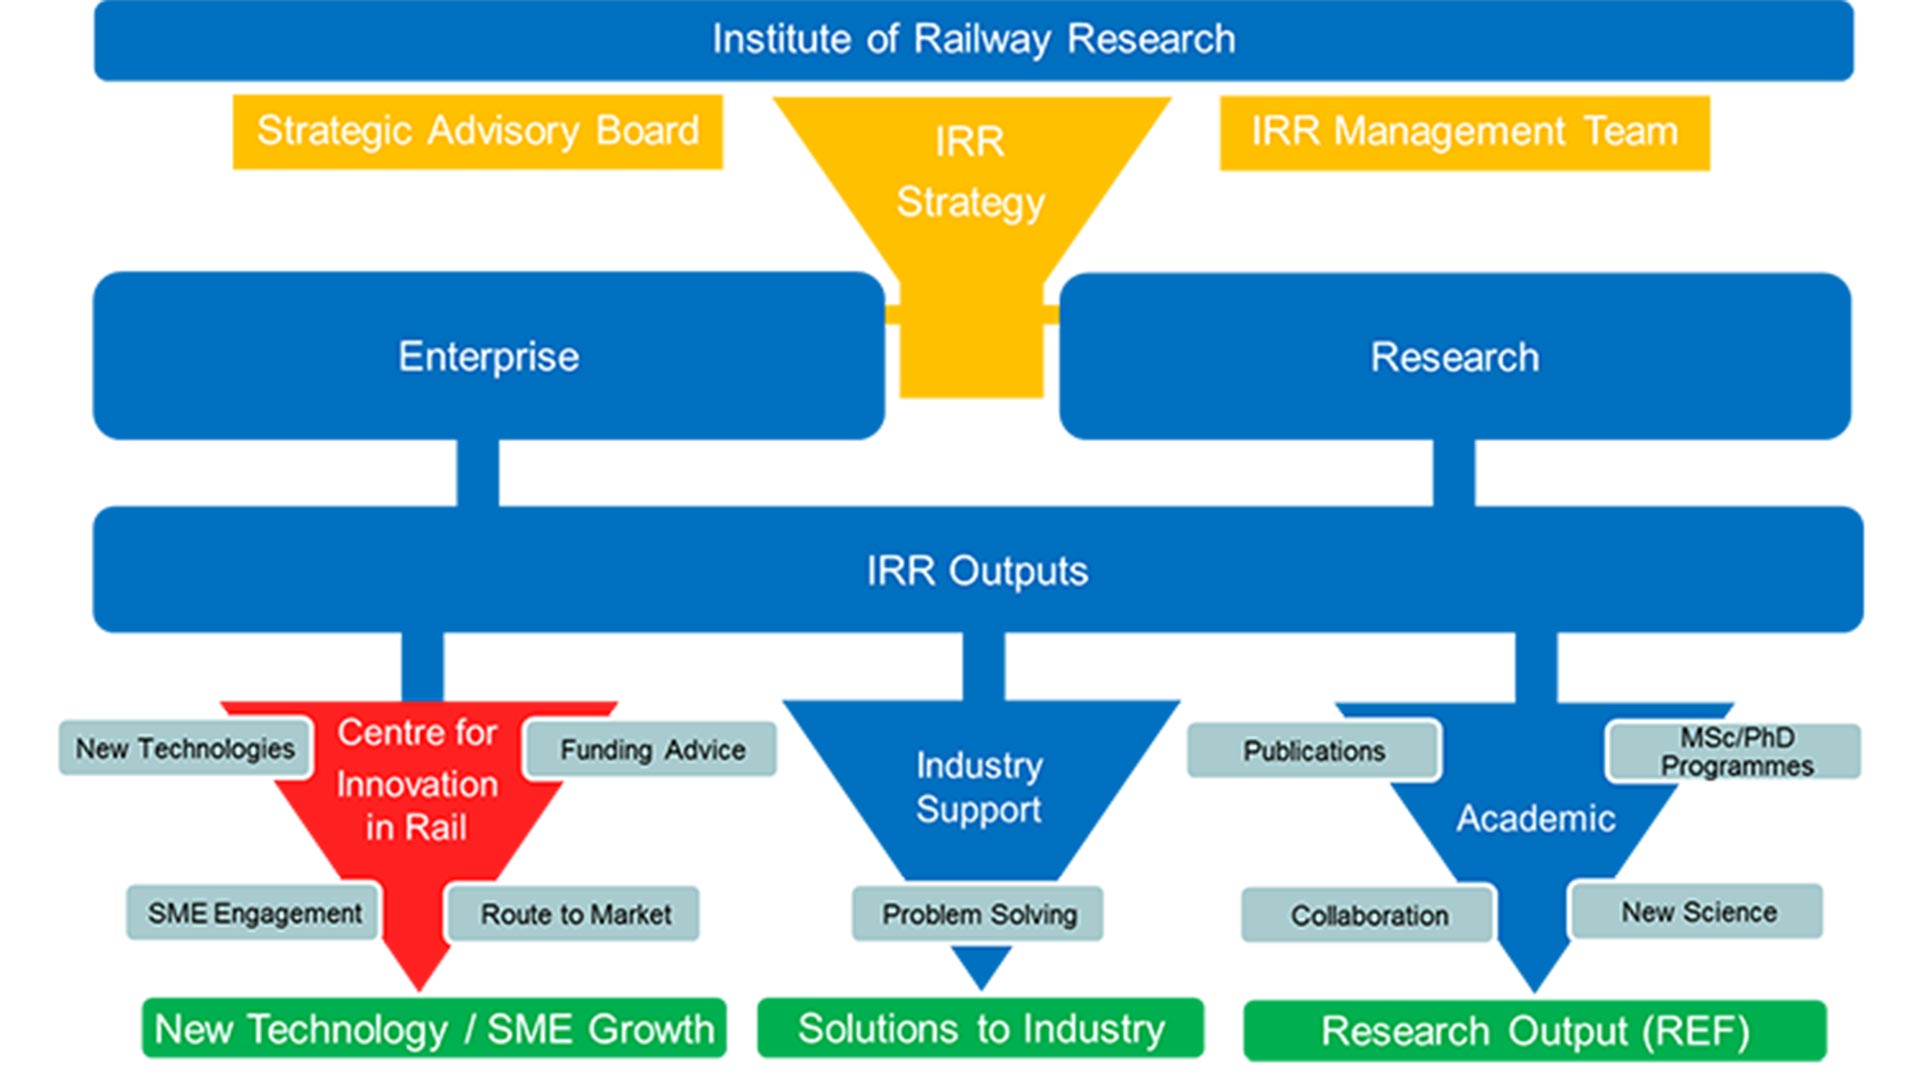 Centre for Innovation in Rail